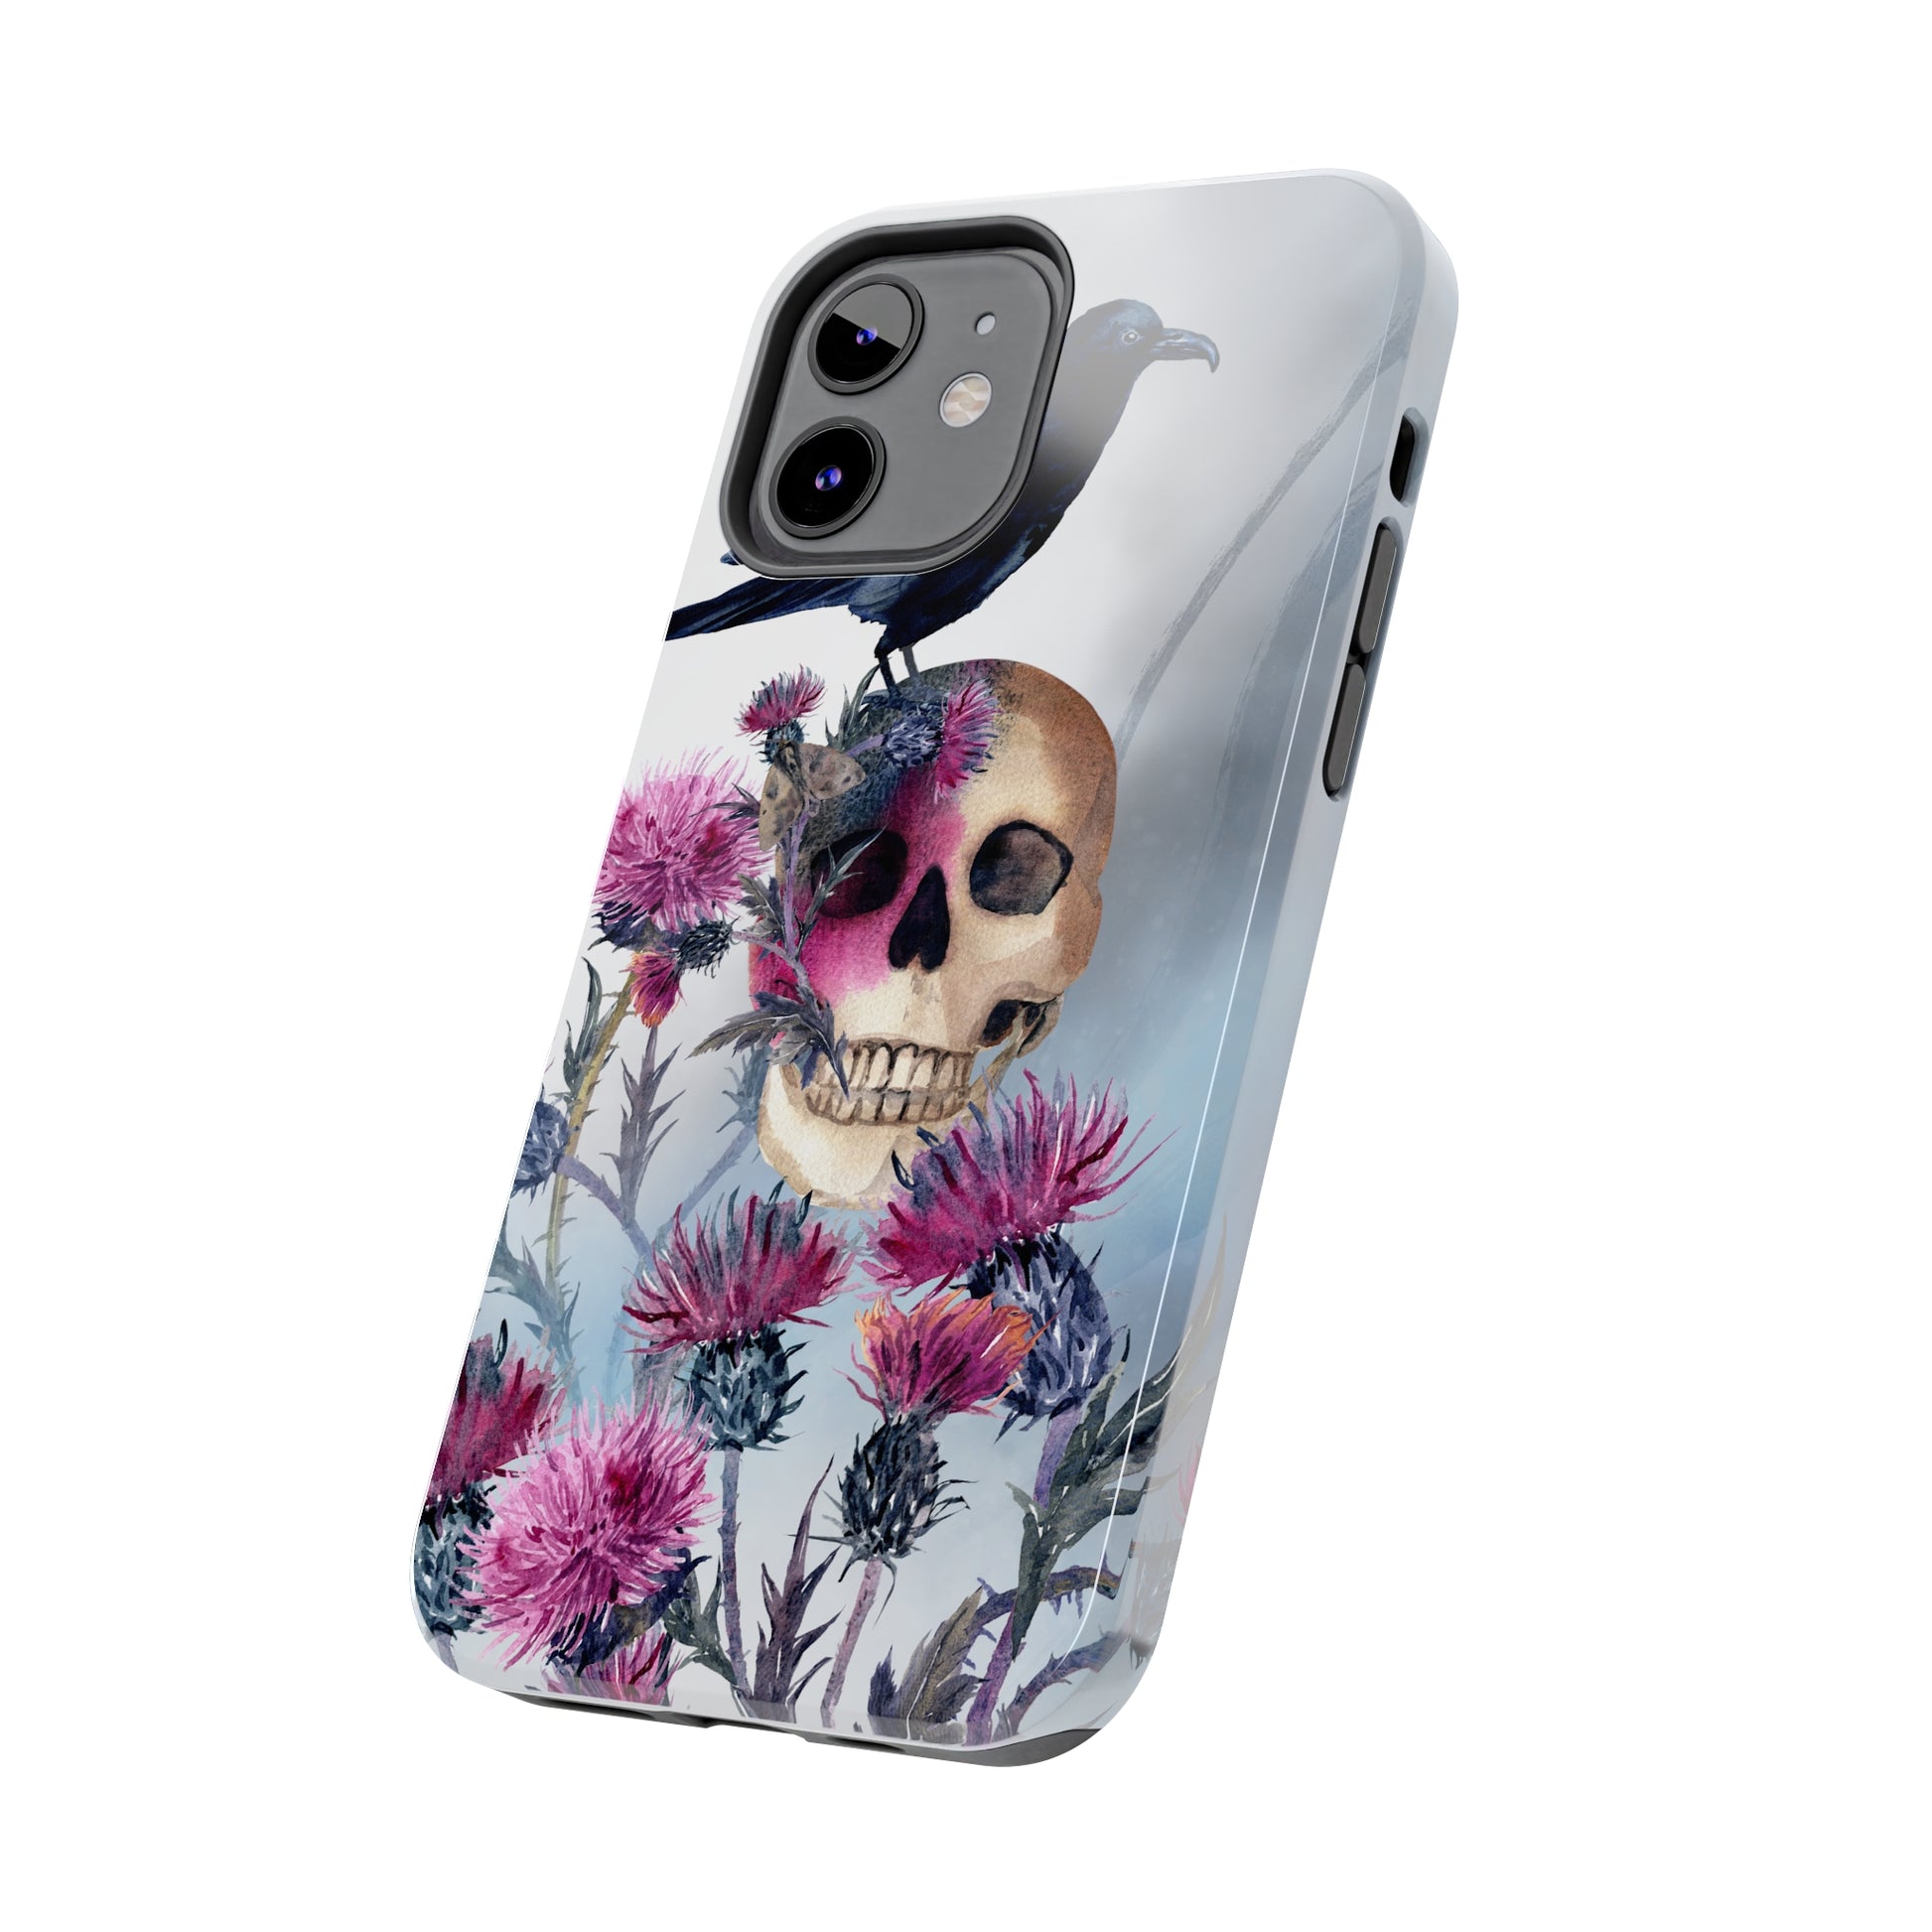 Quoth the Raven Skull: iPhone Tough Case Design - Wireless Charging - Superior Protection - Original Graphics by TheGlassyLass.com